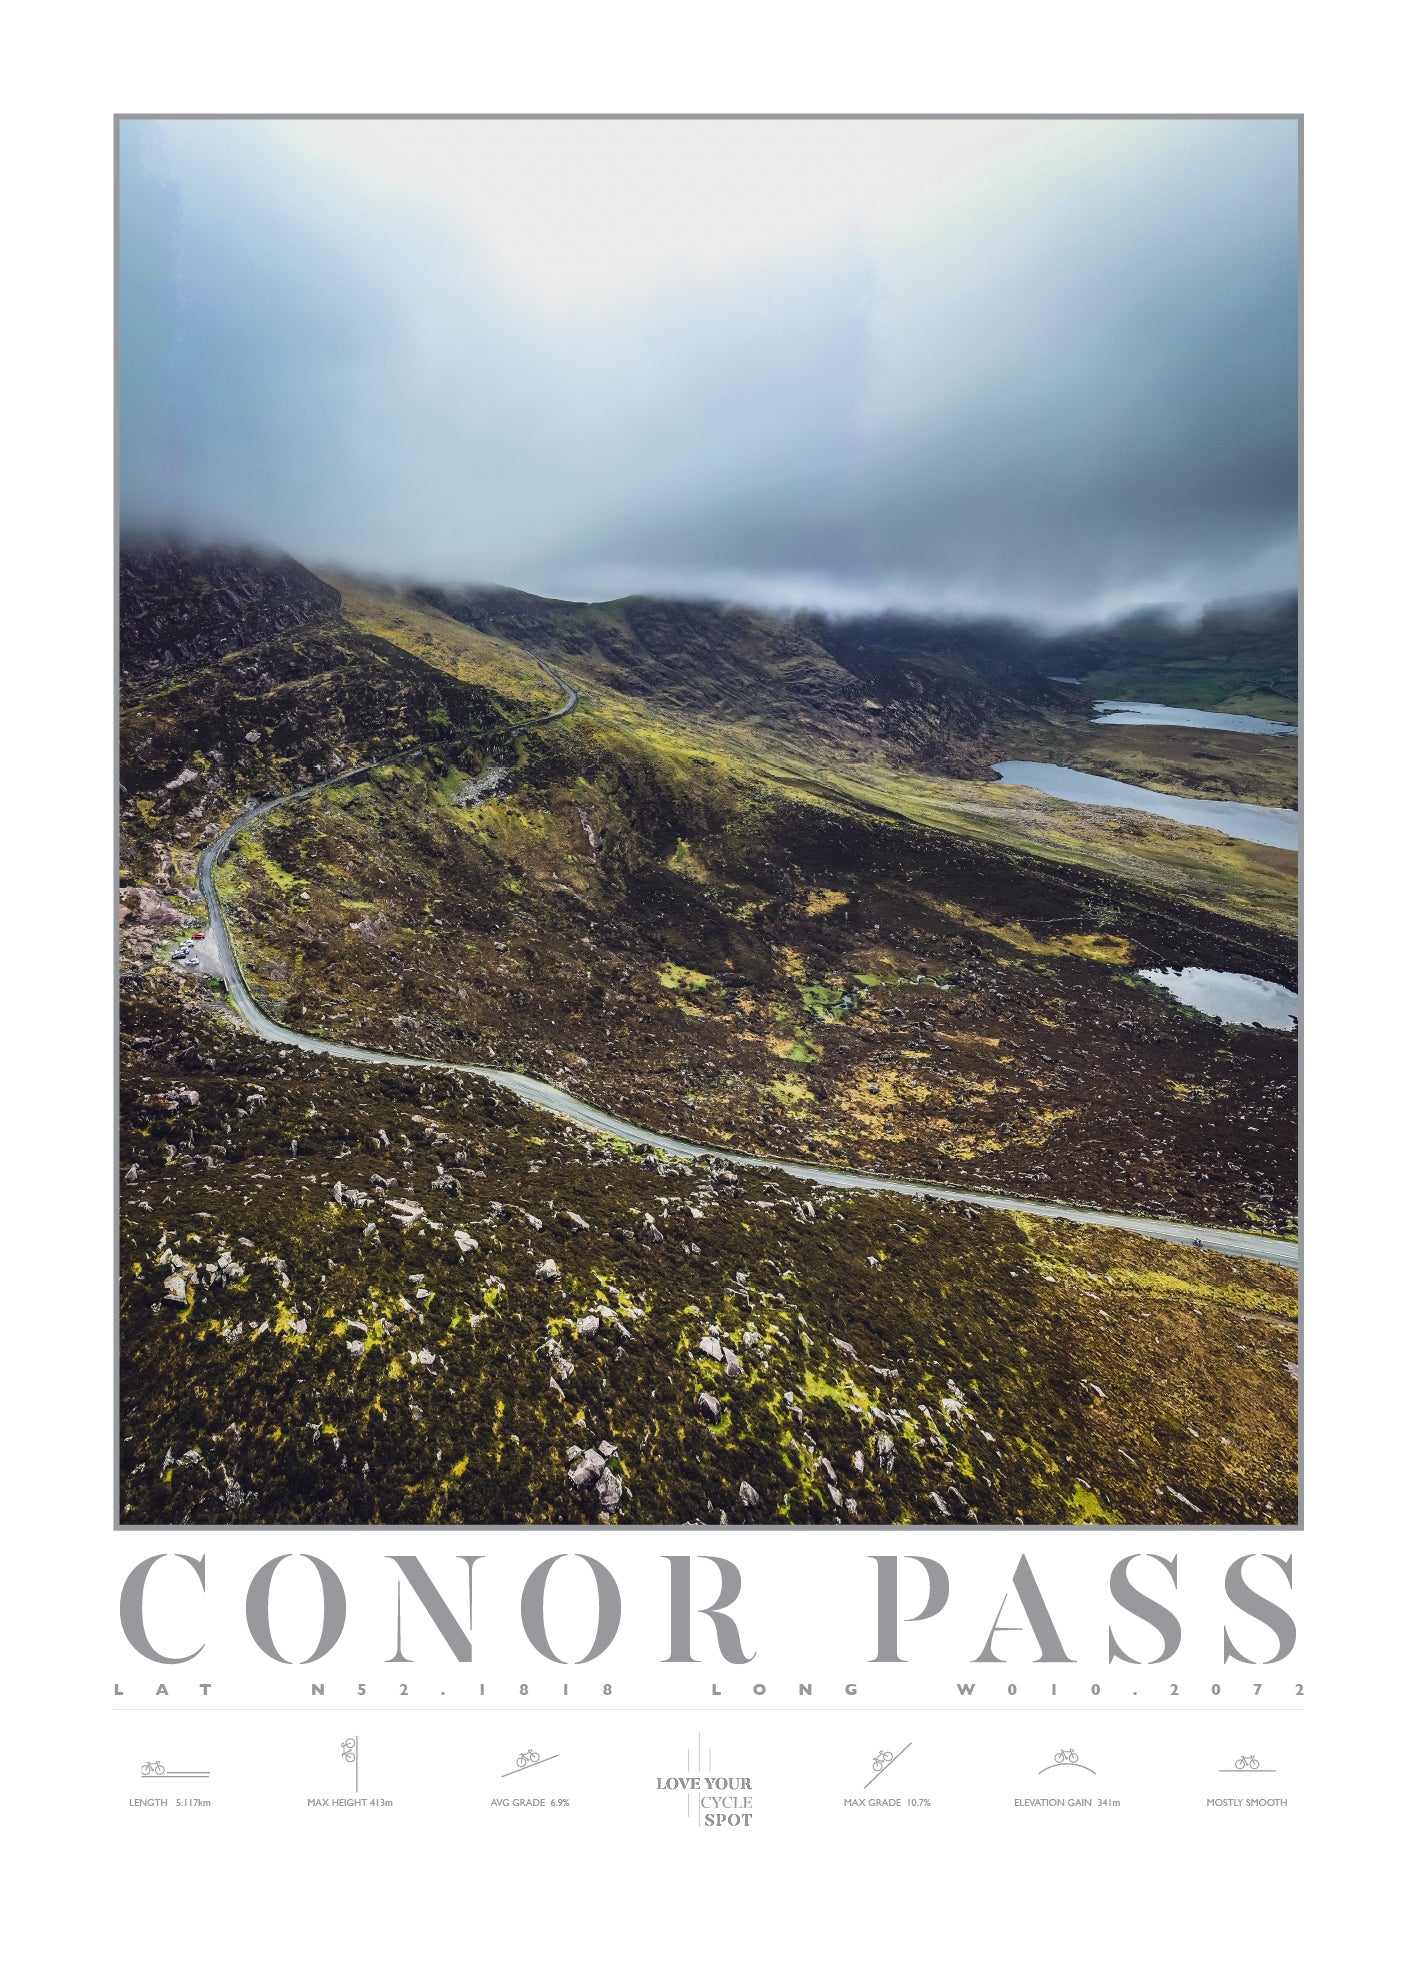 CONOR PASS CO KERRY